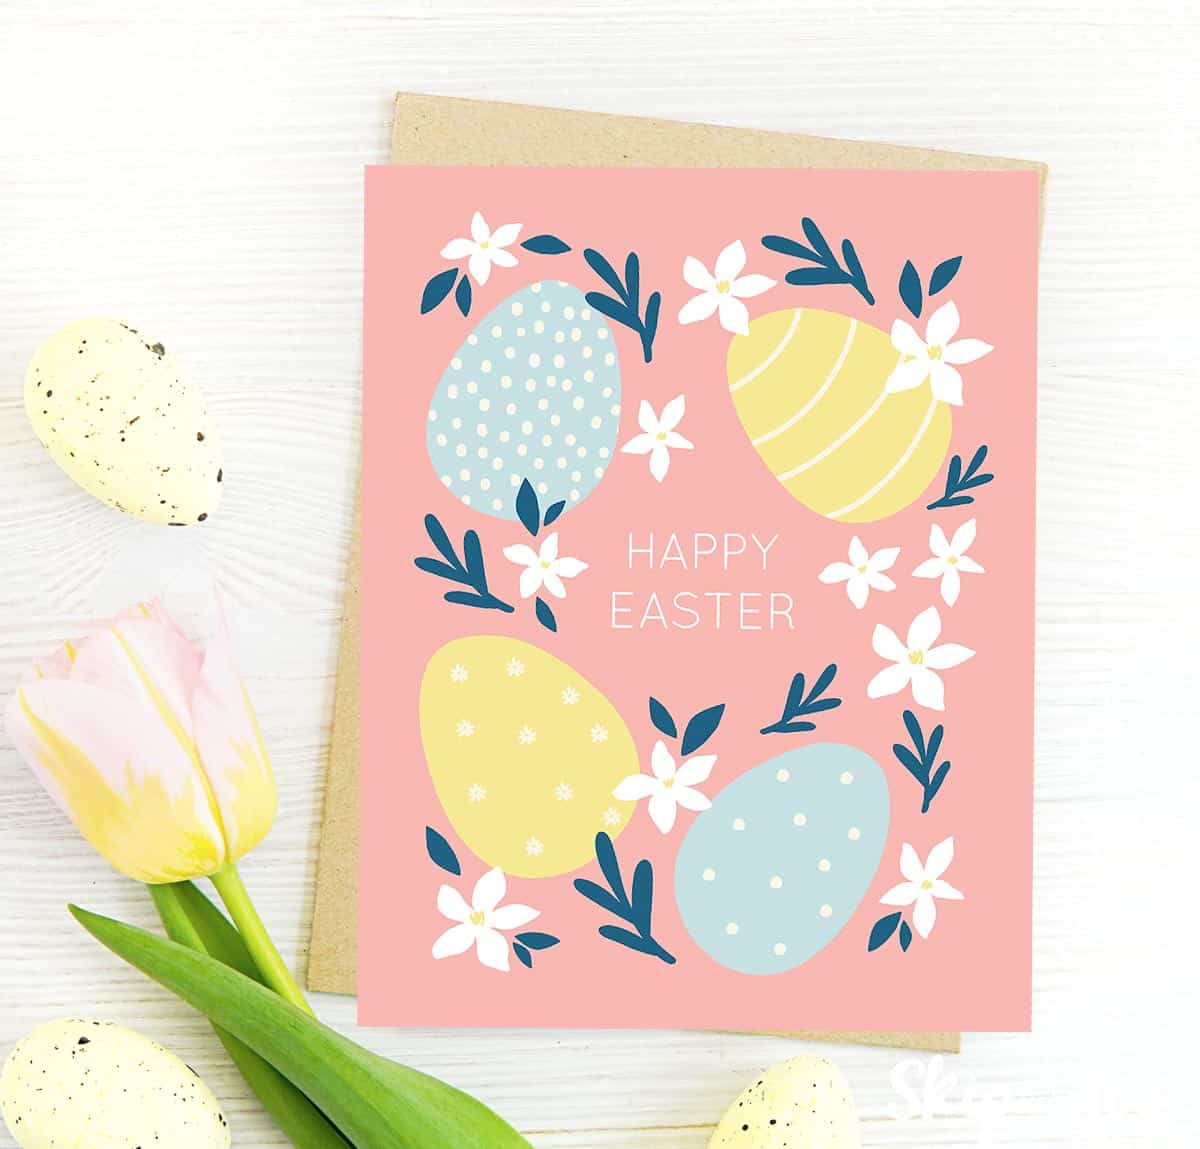 Image shows a pink Happy Easter greeting card decorated with Easter eggs and flowers, next to a white flower. from skip to my lou